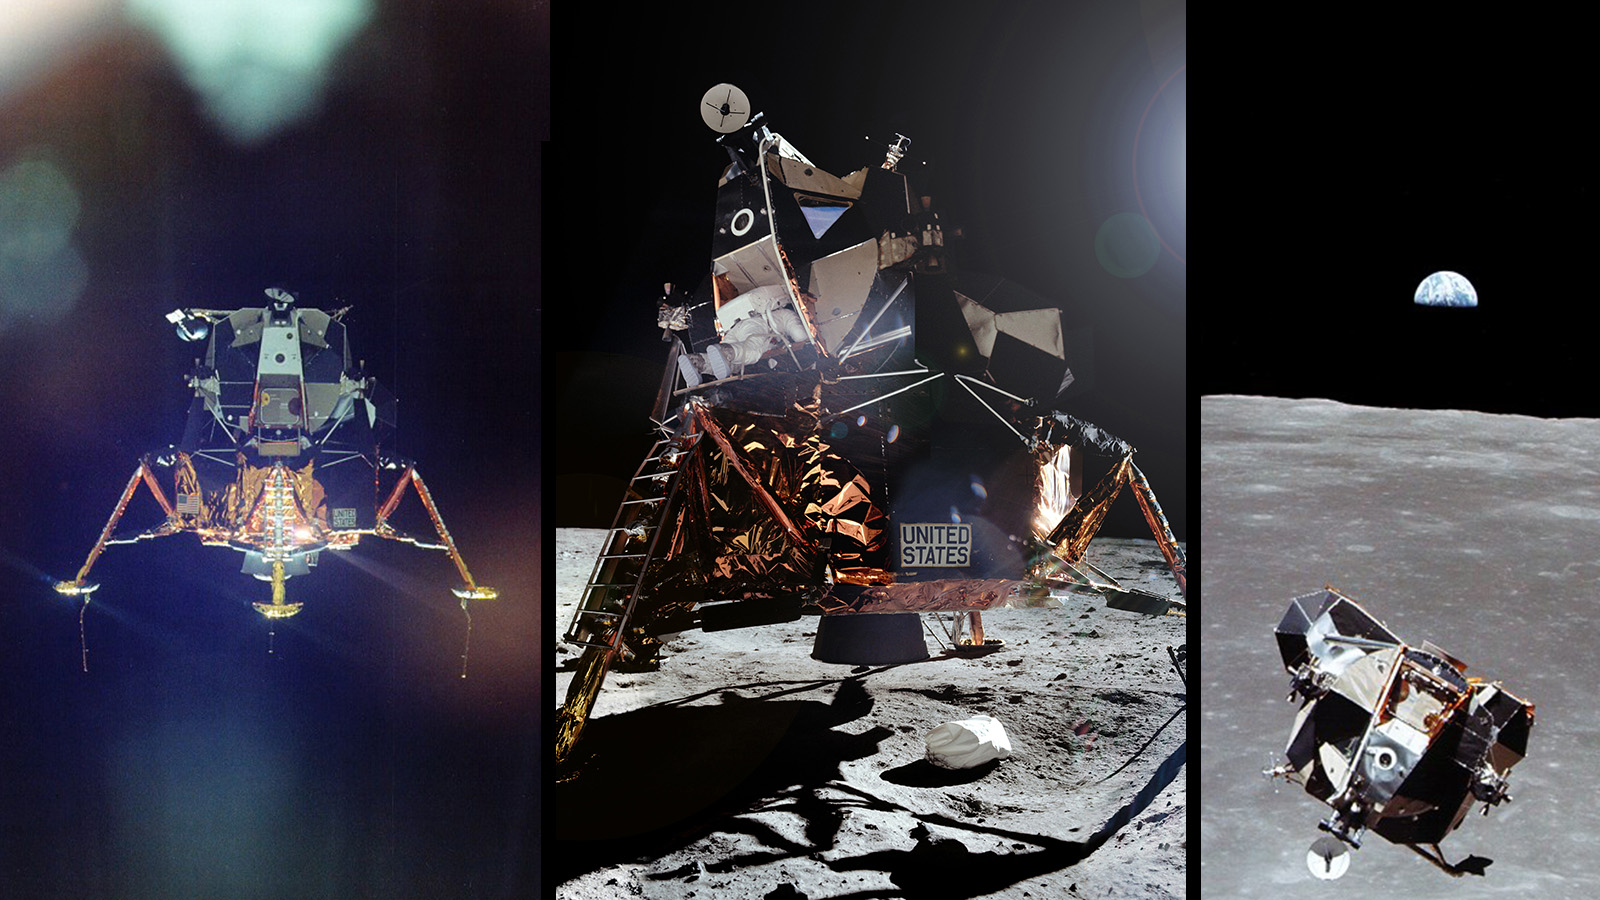 Collage of three images showing the lunar module during its descent to the Moon, on the lunar surface and during its ascent.